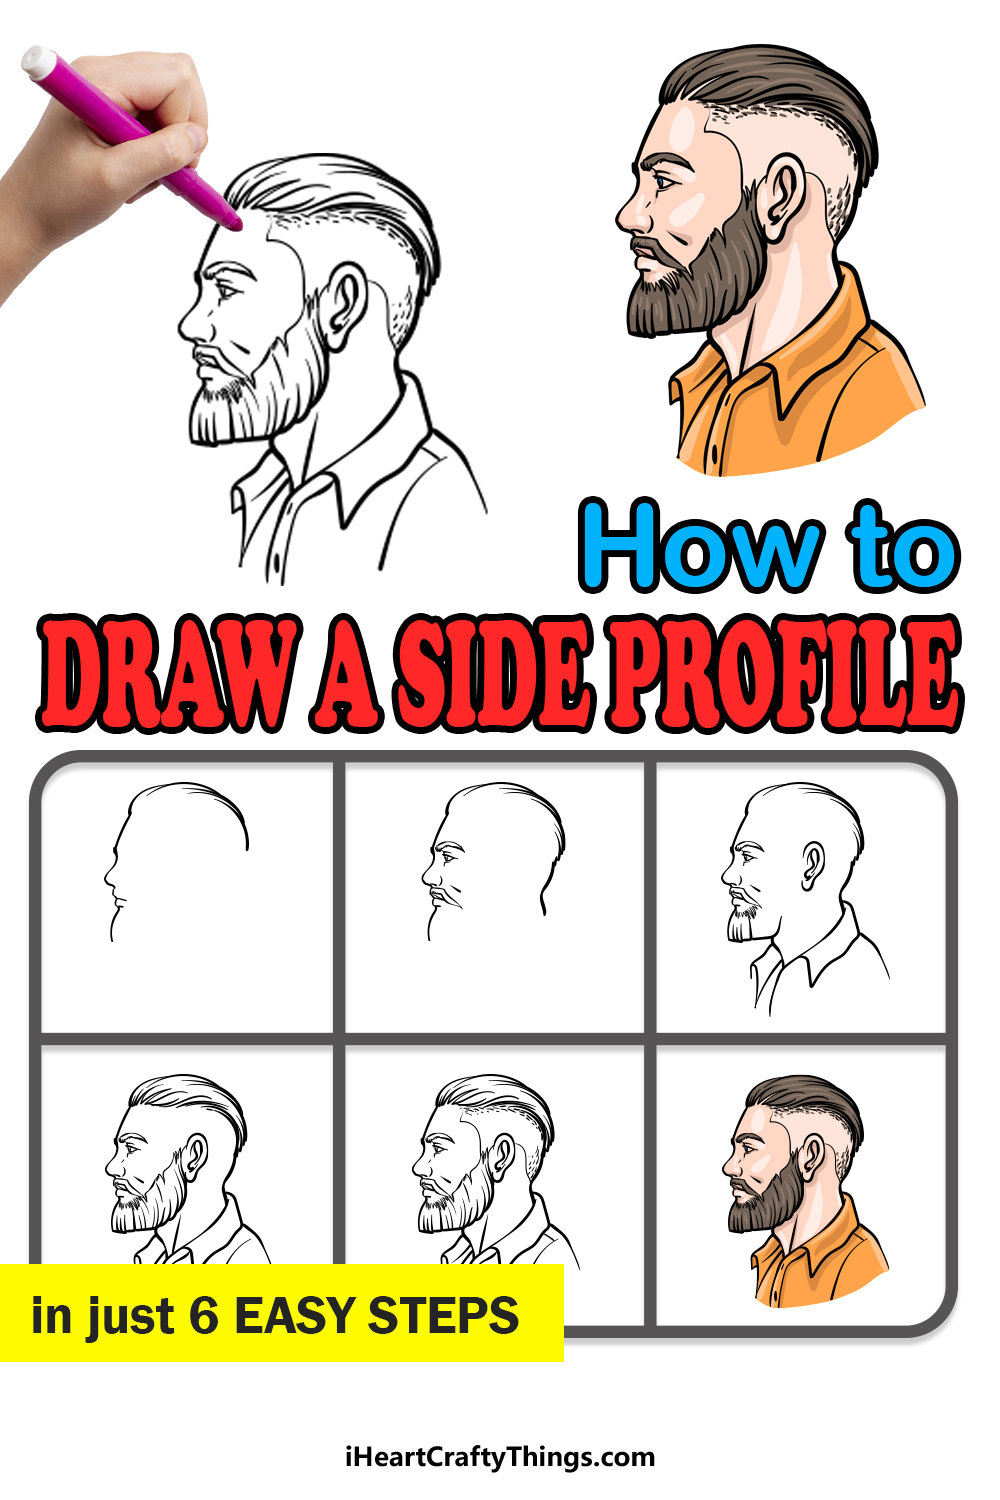 how to draw a Side Profile in 6 easy steps